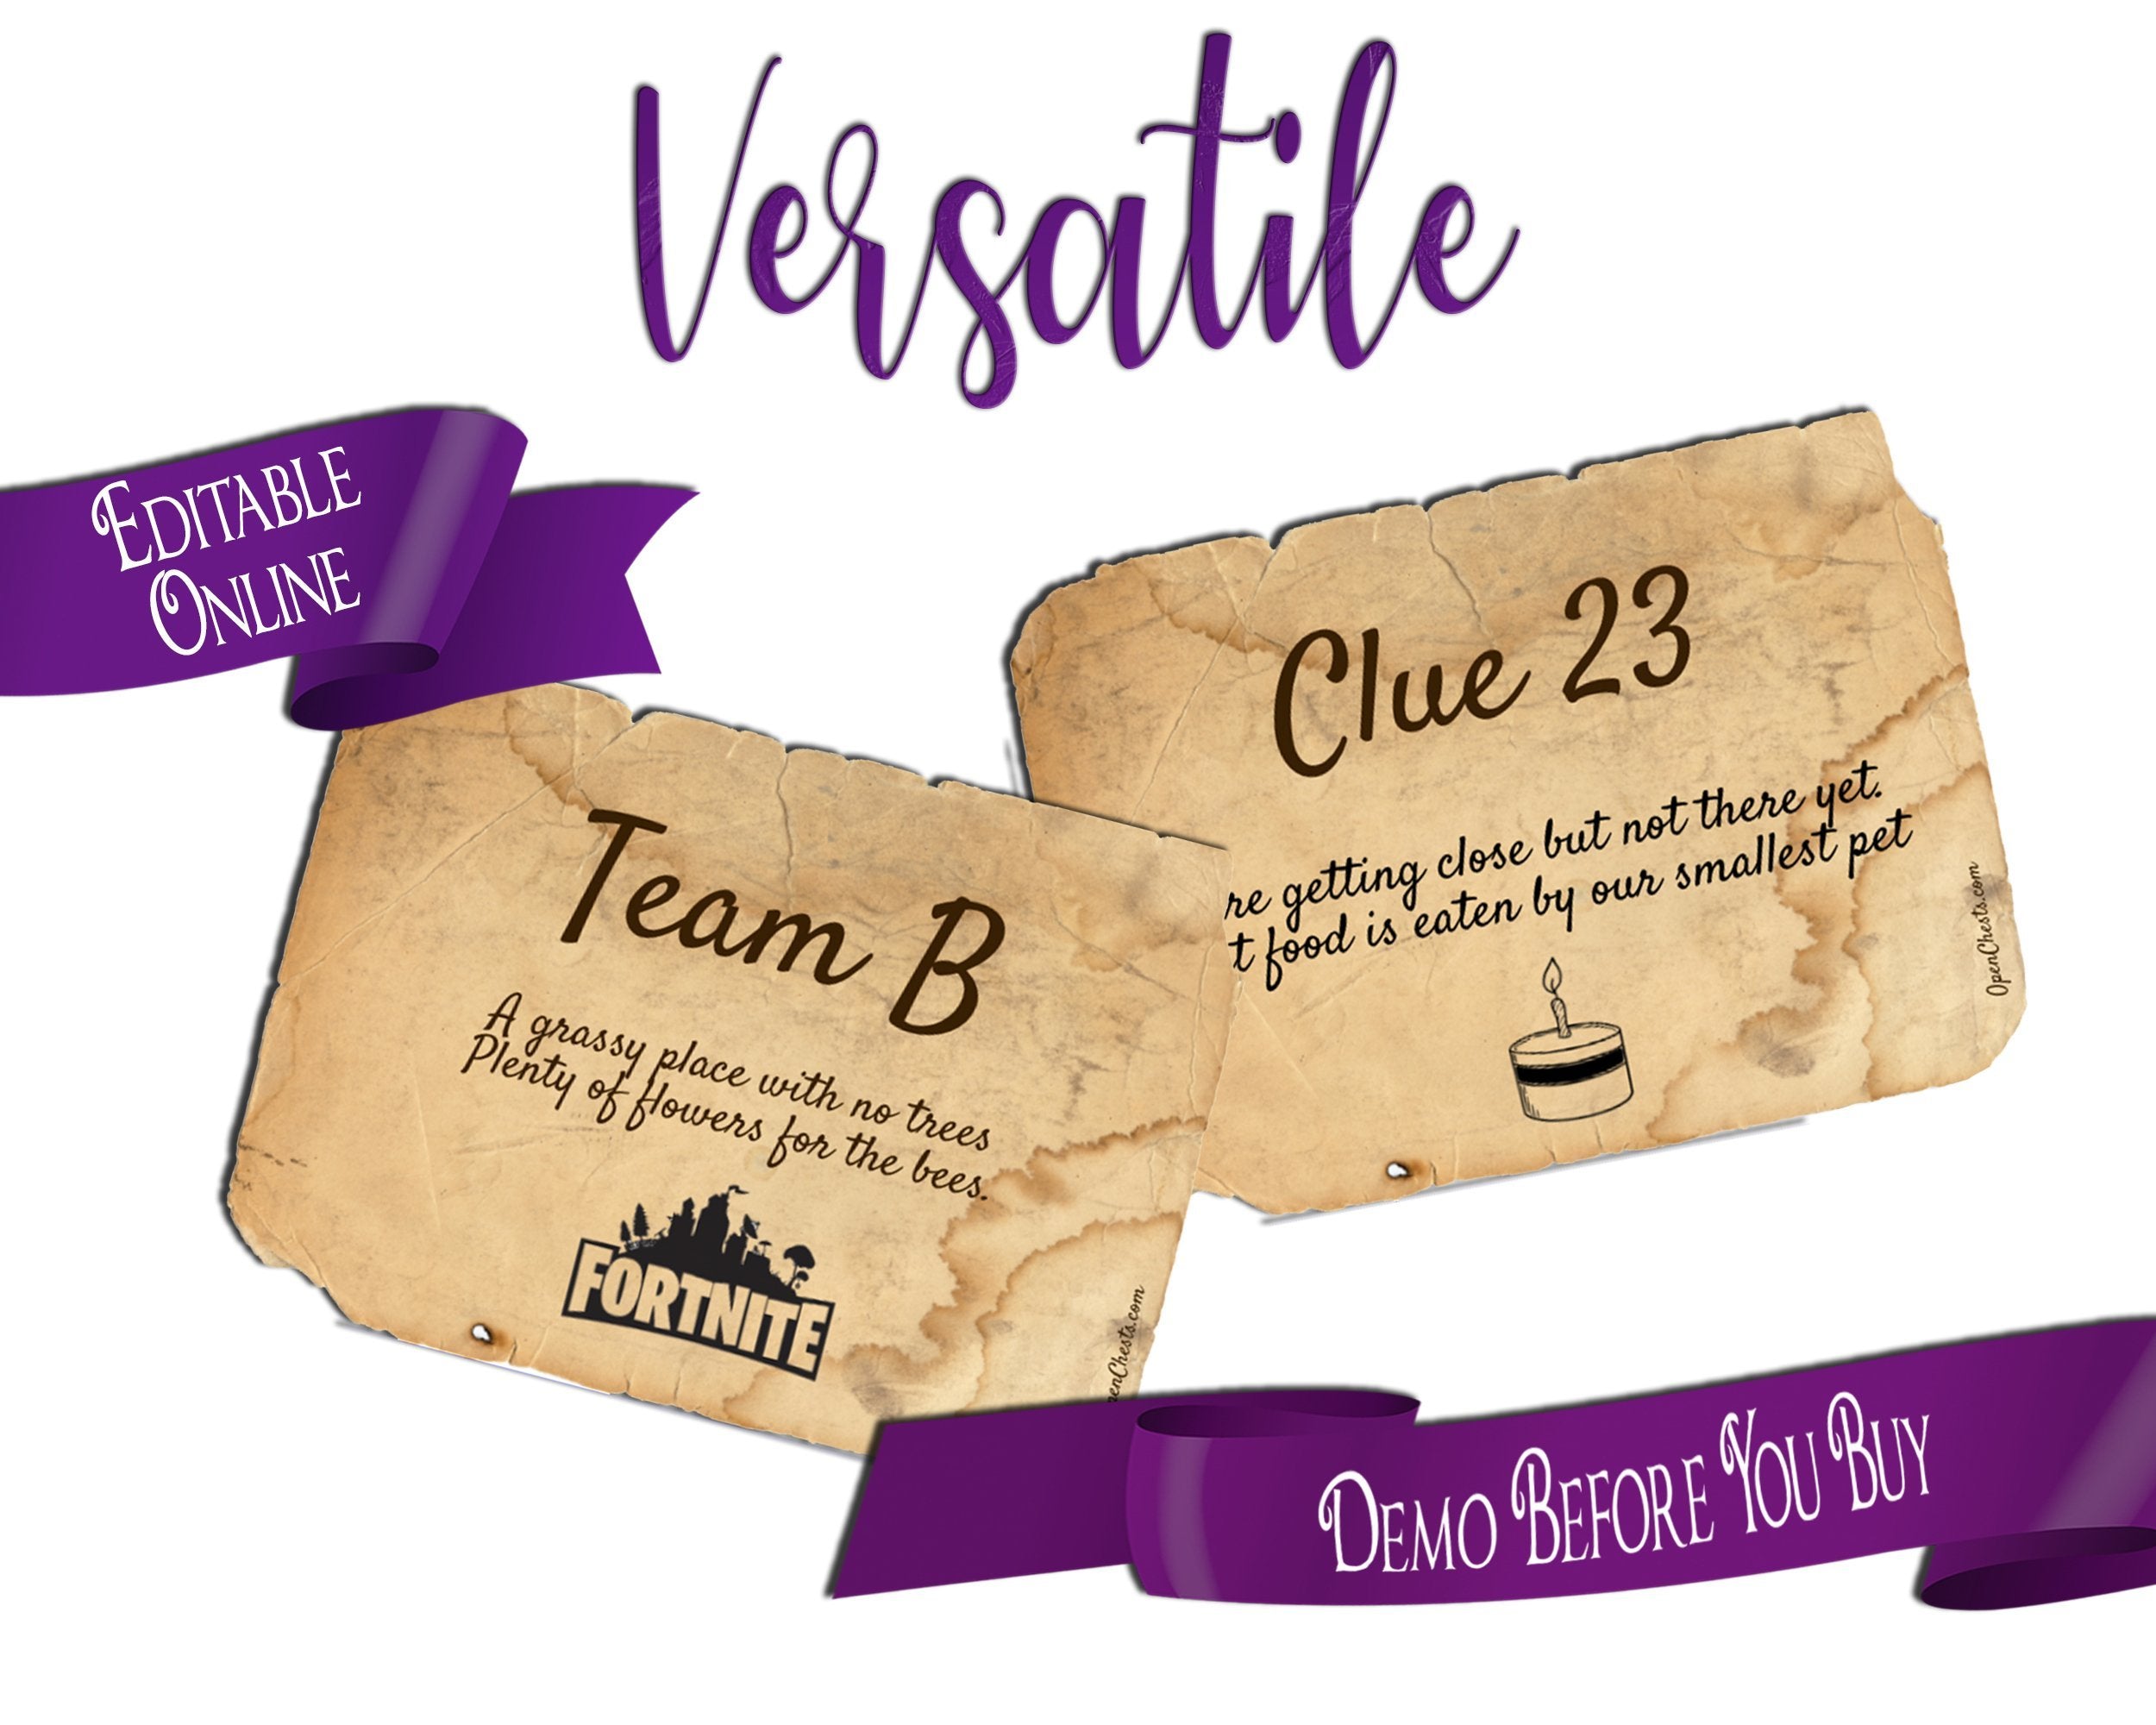 Riddle Treasure Hunt Clues - older kids, teens, adults - Open Chests